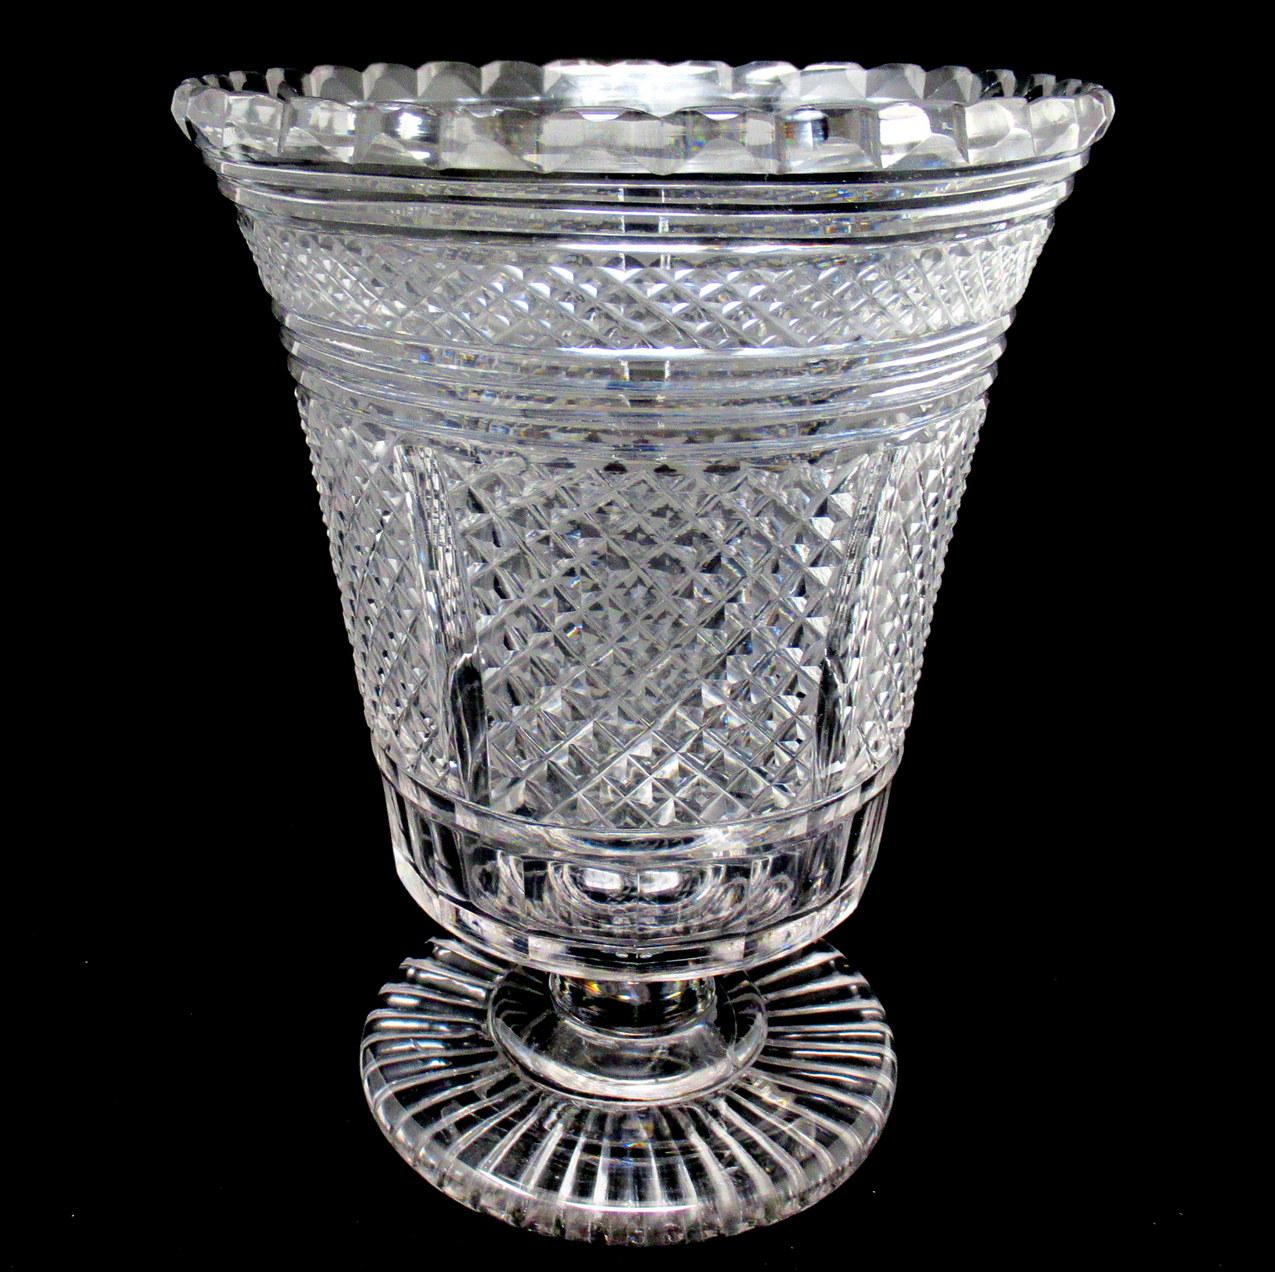 Stunning and Extremely Rare Georgian Irish Heavy Gauge hand cut crystal footed vase or centerpiece of trumpet circular outline raised on a plain socle above a circular fan cut flat base, of outstanding quality and condition. Circa 1800 - 1825.